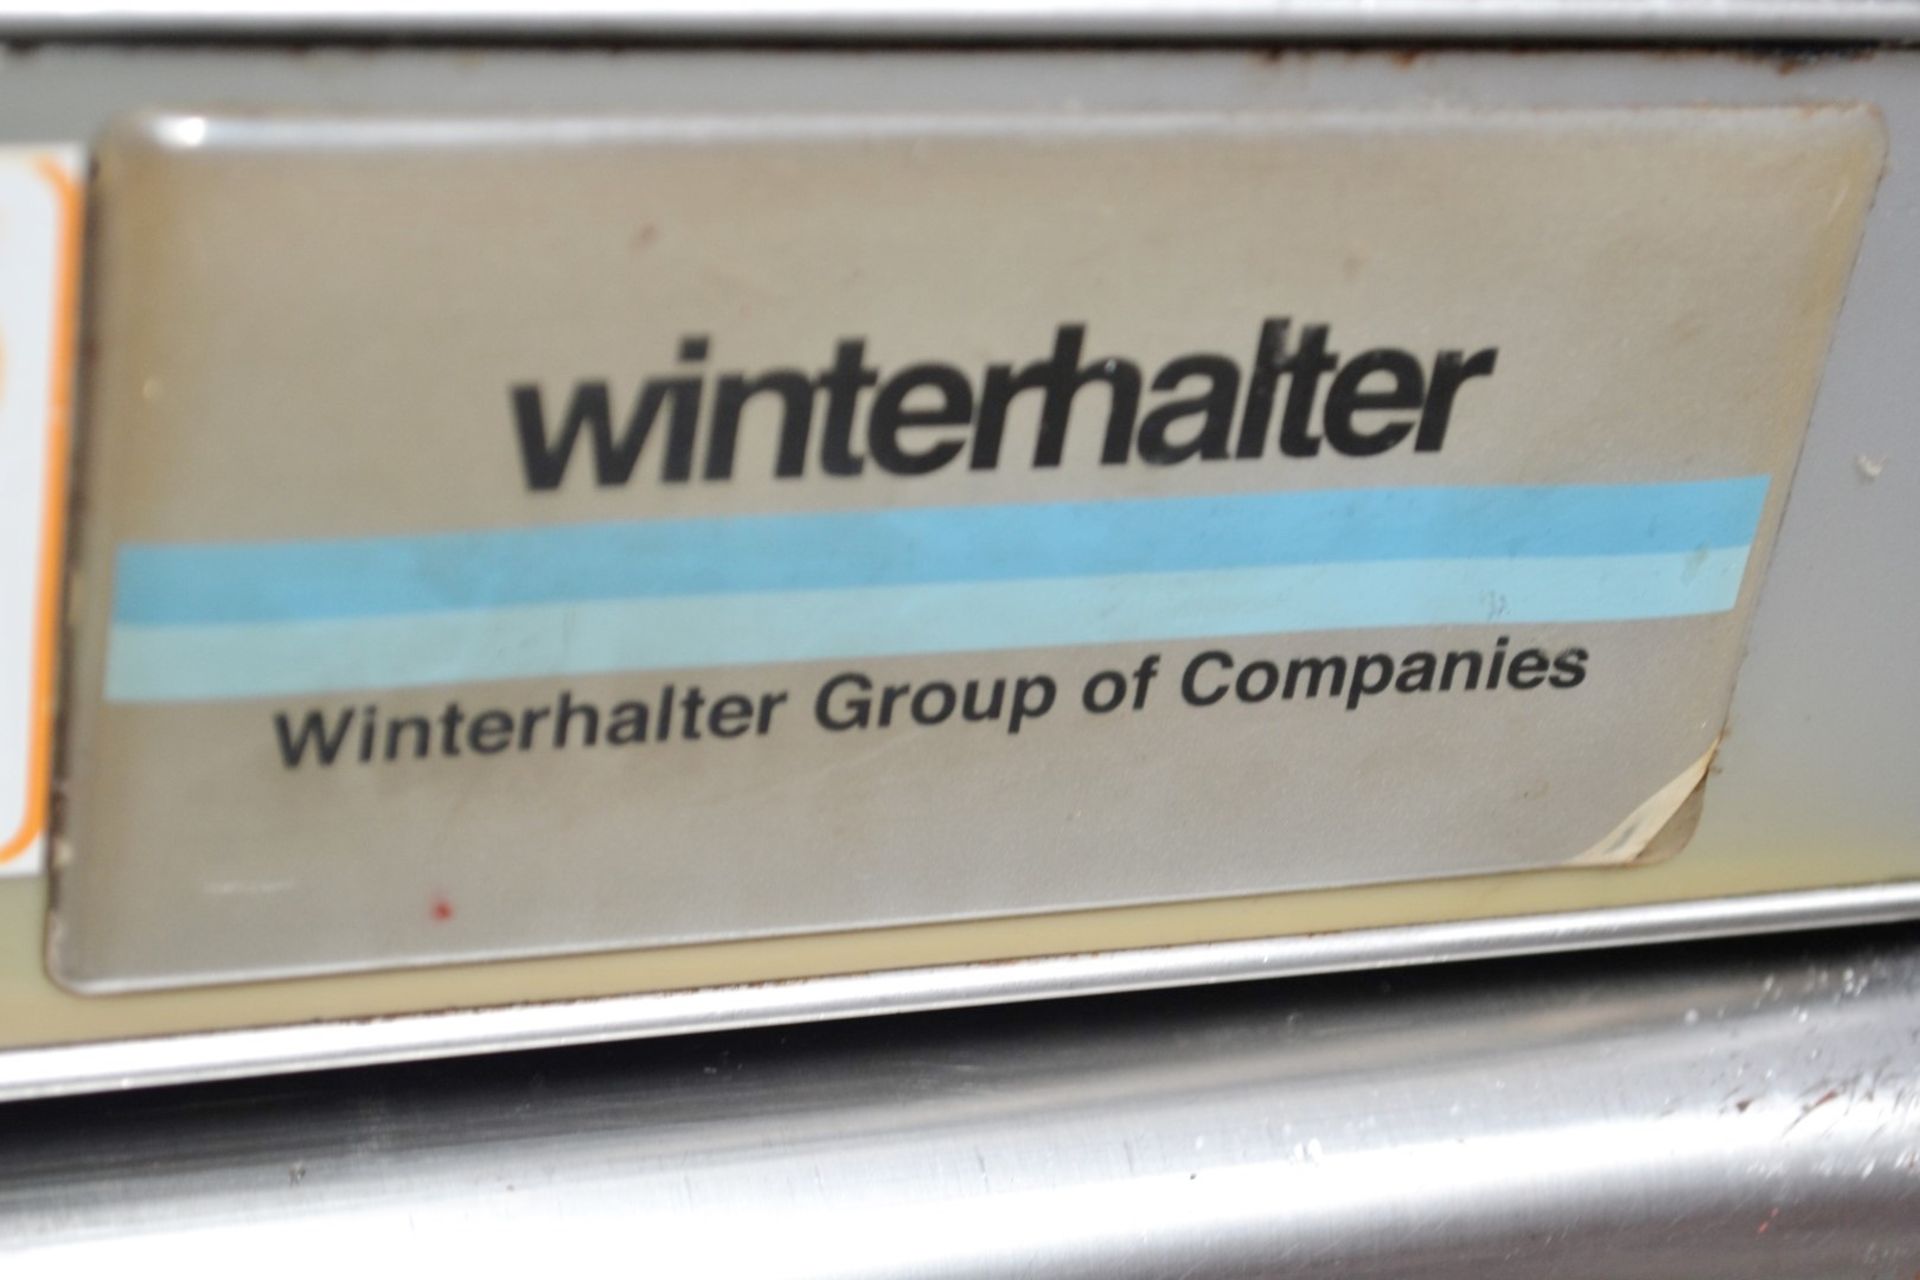 1 x Winterhalter E308-v1 Counter Height Stainless Steel Glass Washer / Dishwasher - Dimensions: D60 - Image 5 of 6